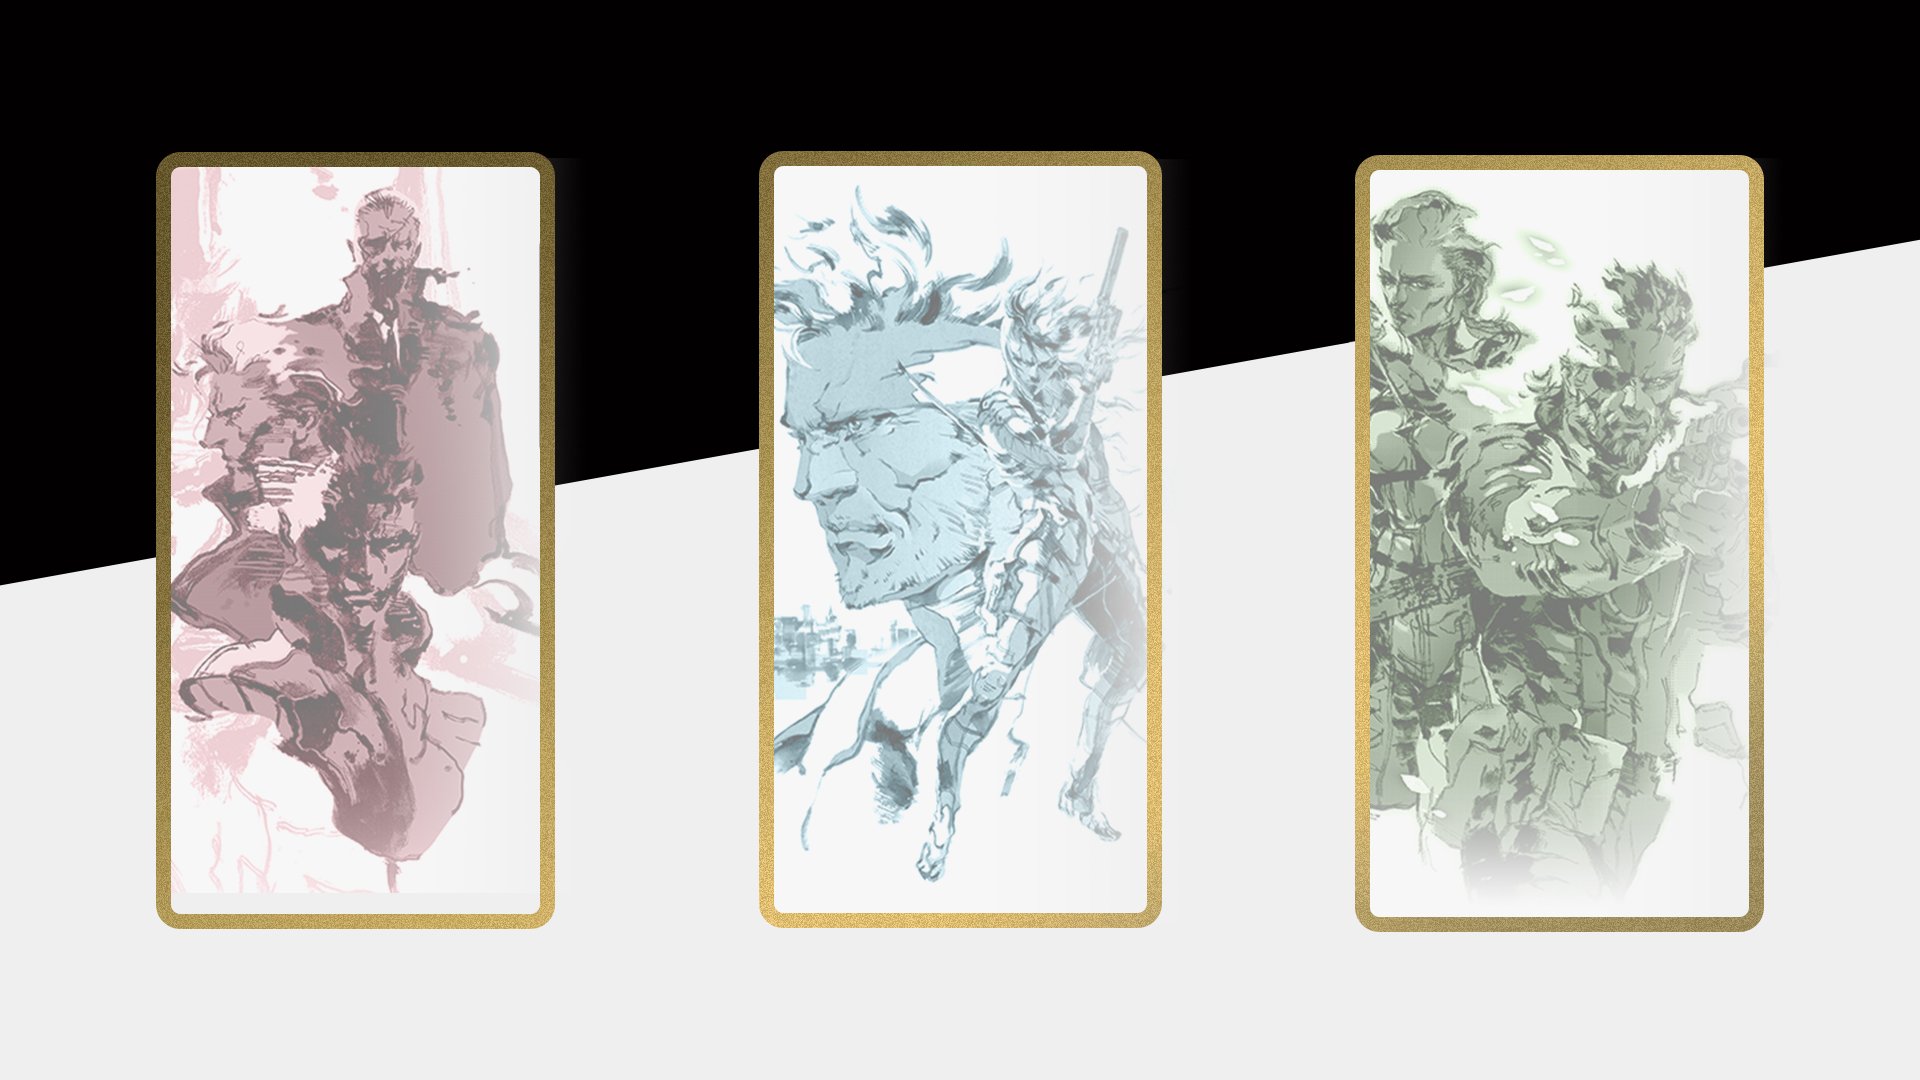 Metal Gear Solid: Master Collection Vol 1 has been dated and detailed —  Maxi-Geek